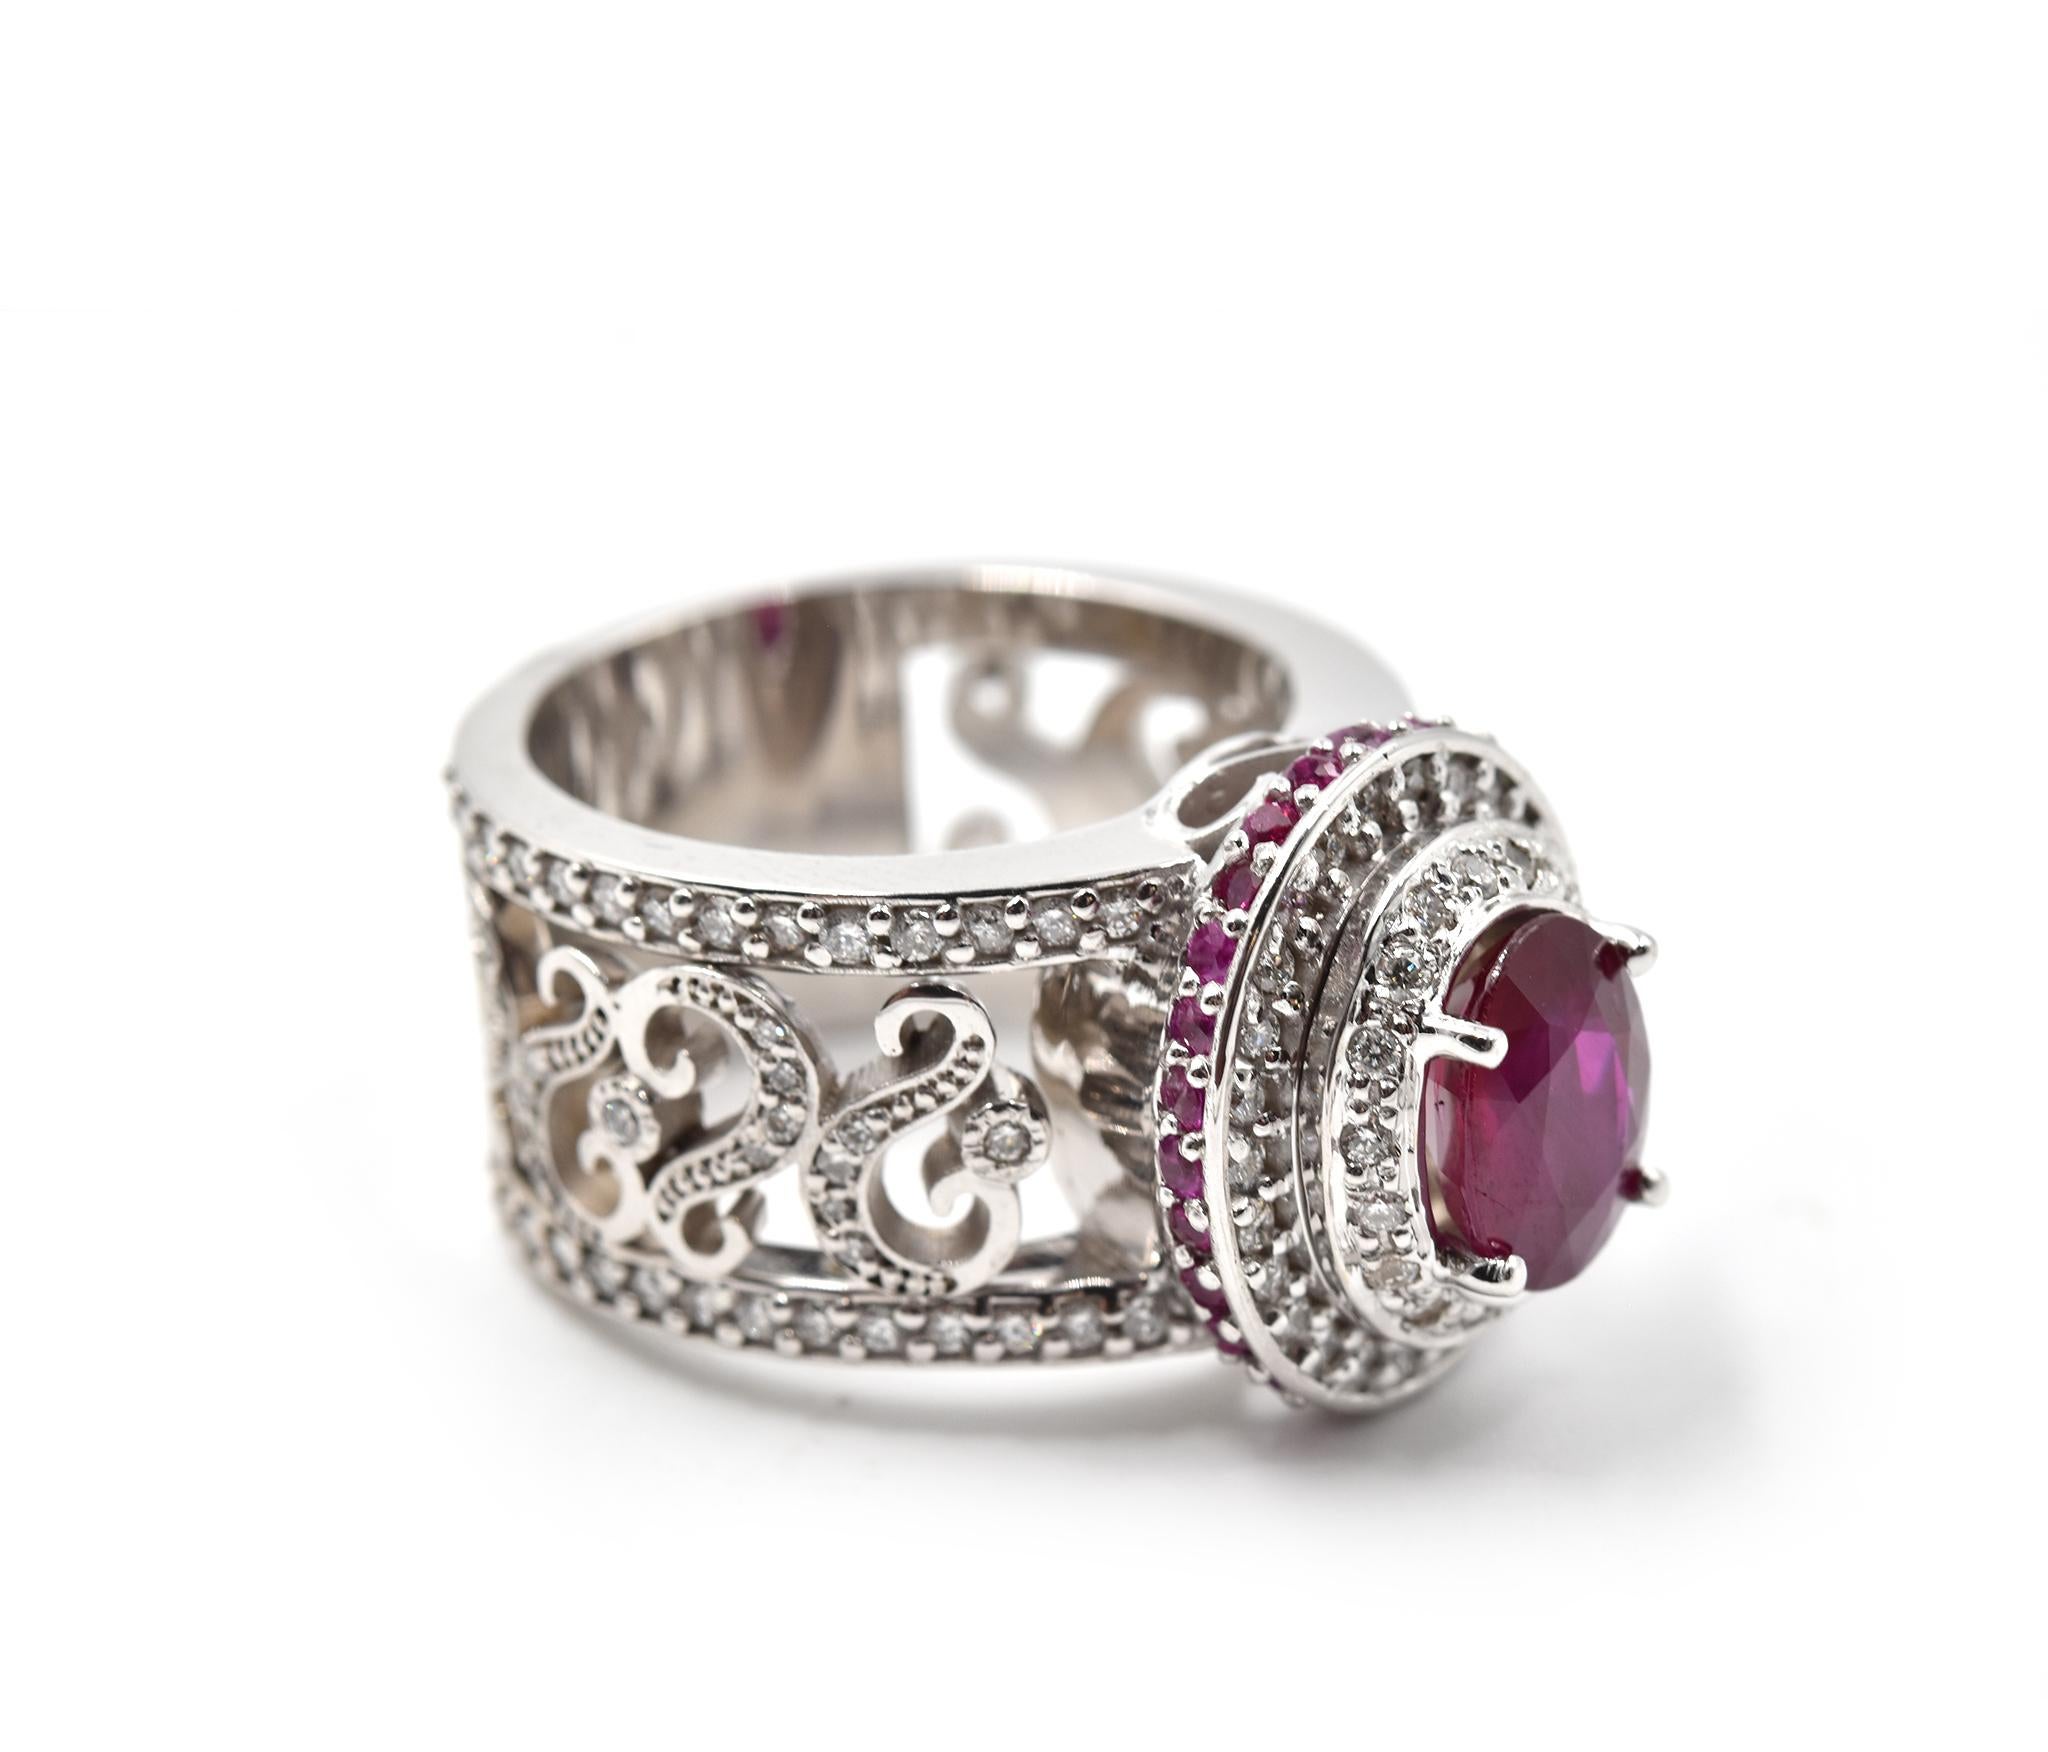 Designer: custom design
Material: 14k white gold
Ruby: oval cut= 2.07ct (no heat)
Ruby Melee: round cut =0.37cttw
Diamonds: 134 round brilliant = 1.20cttw
Color: G
Clarity: VS
Ring Size: 7 ¾ (please allow two additional shipping days for sizing